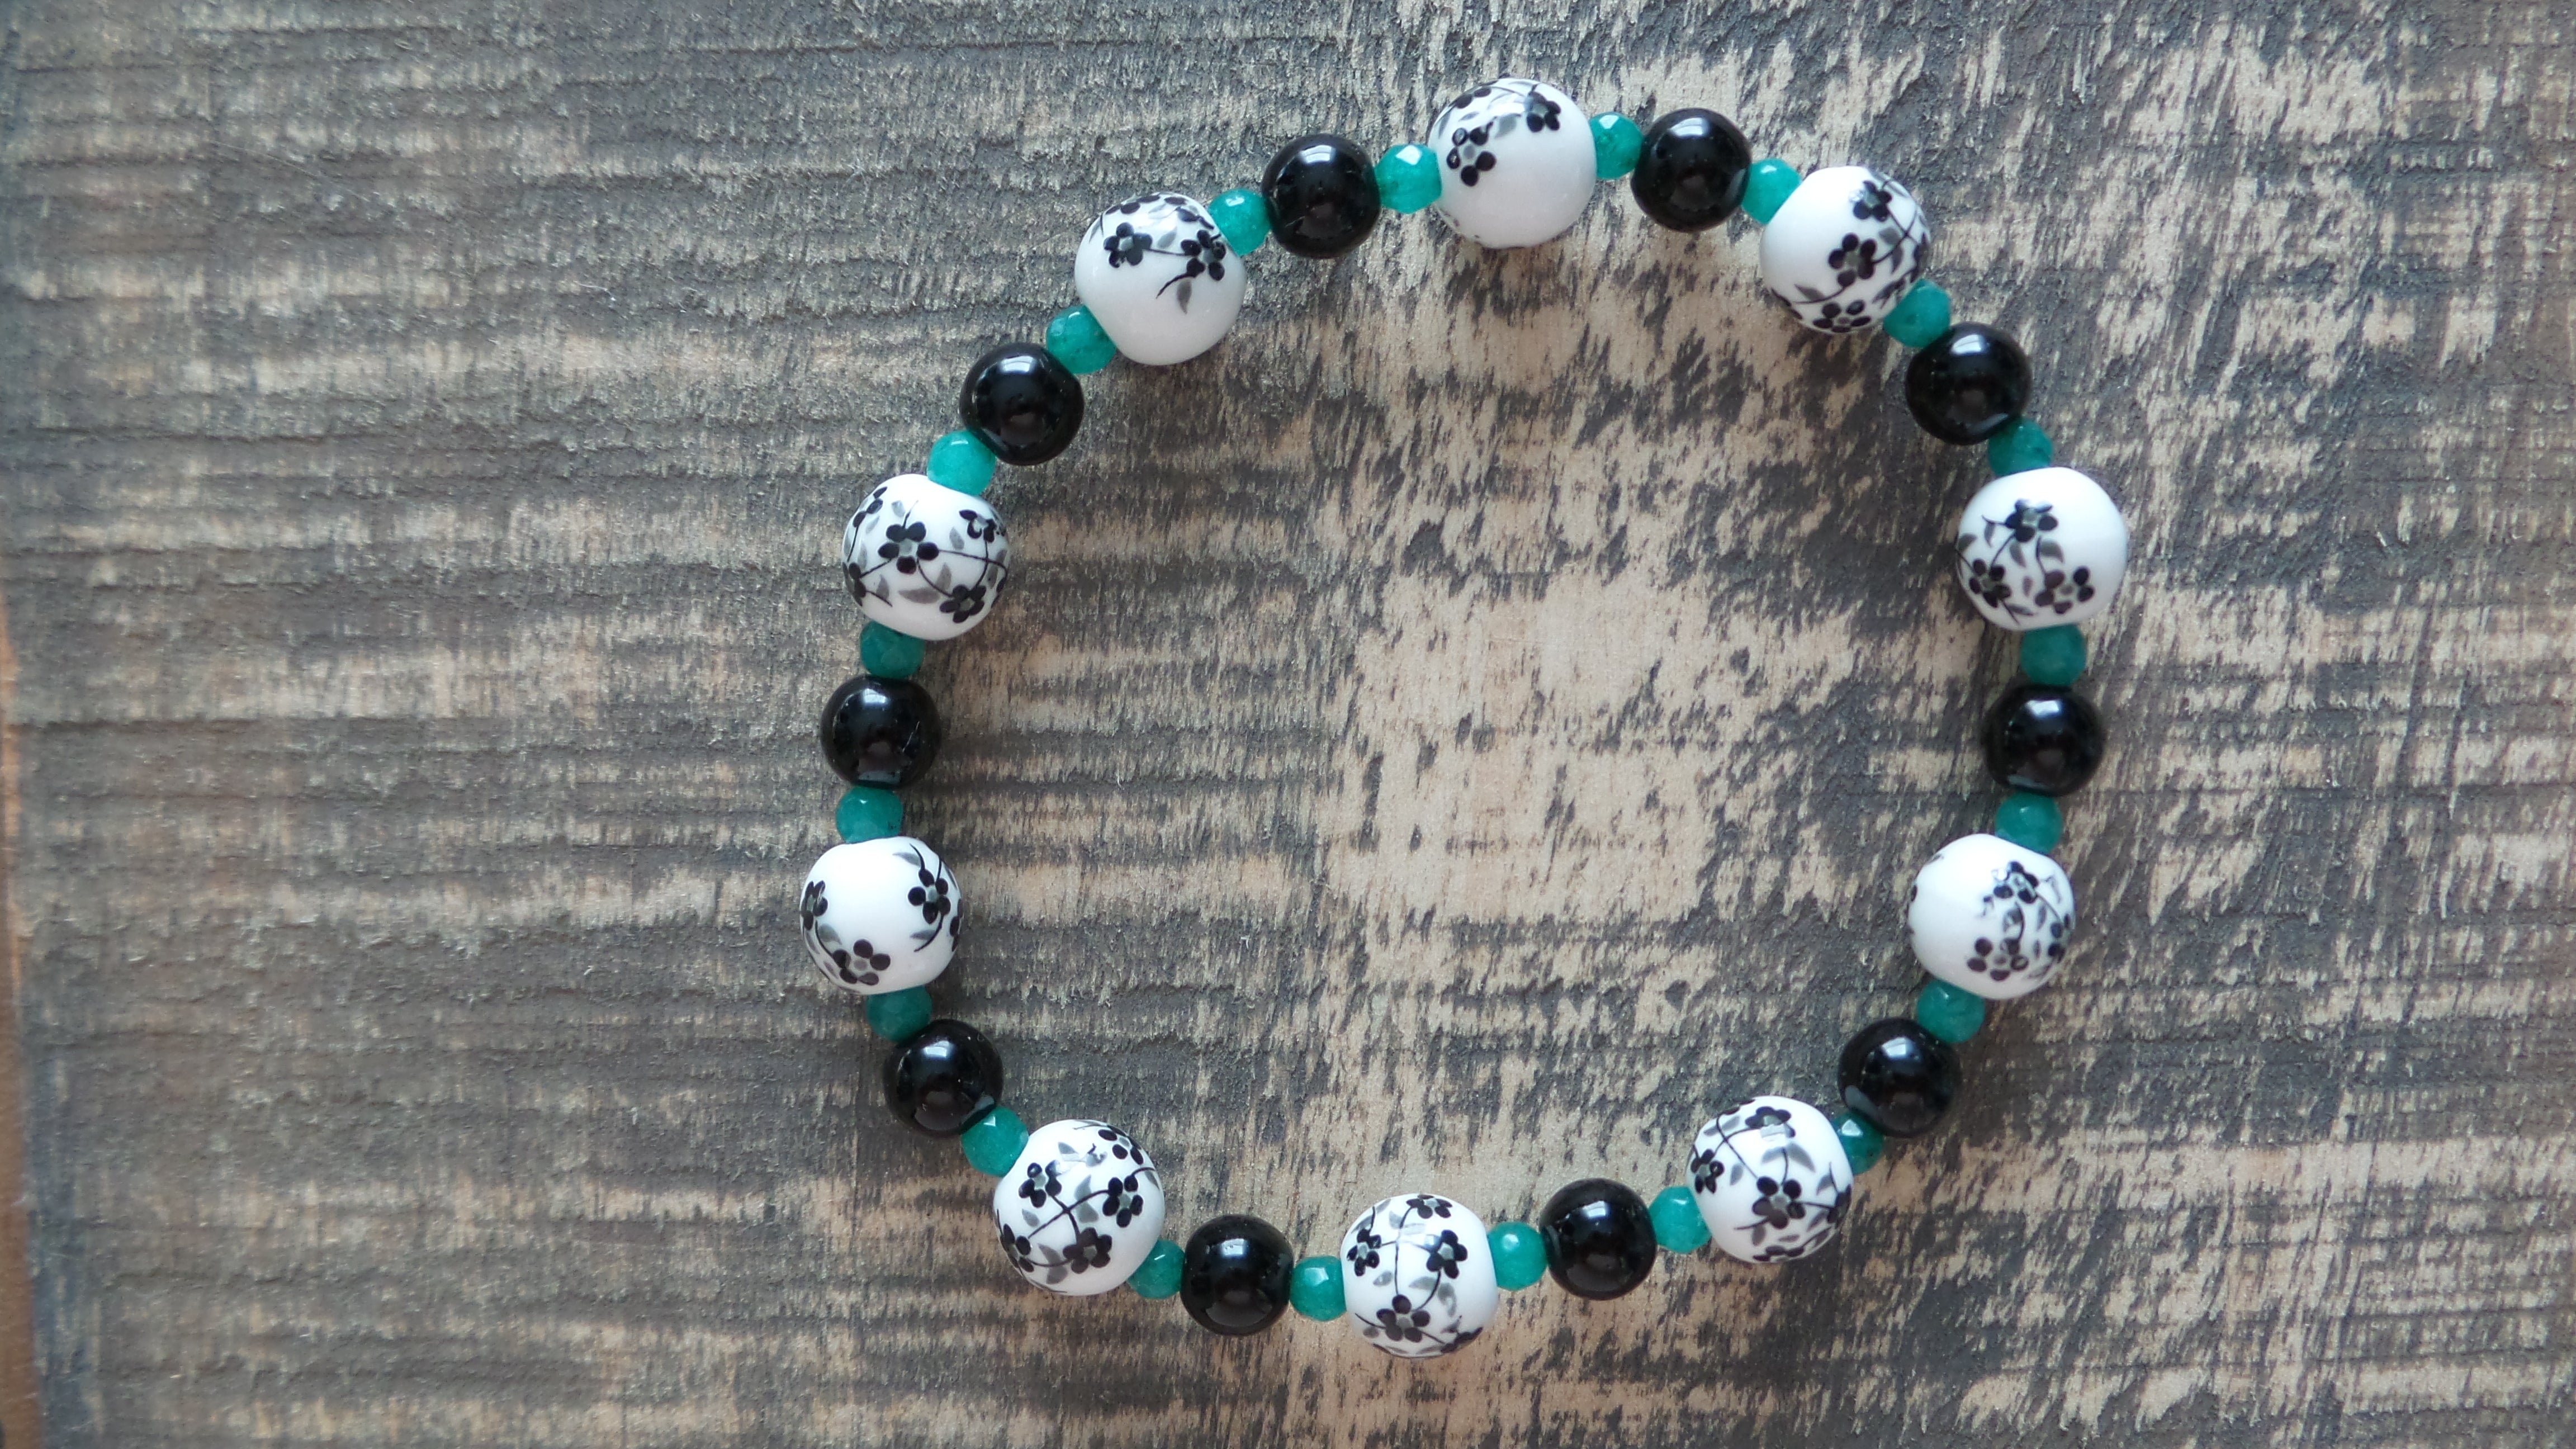 Bracelet- Black and White Floral Glass with Black and Teal Accents